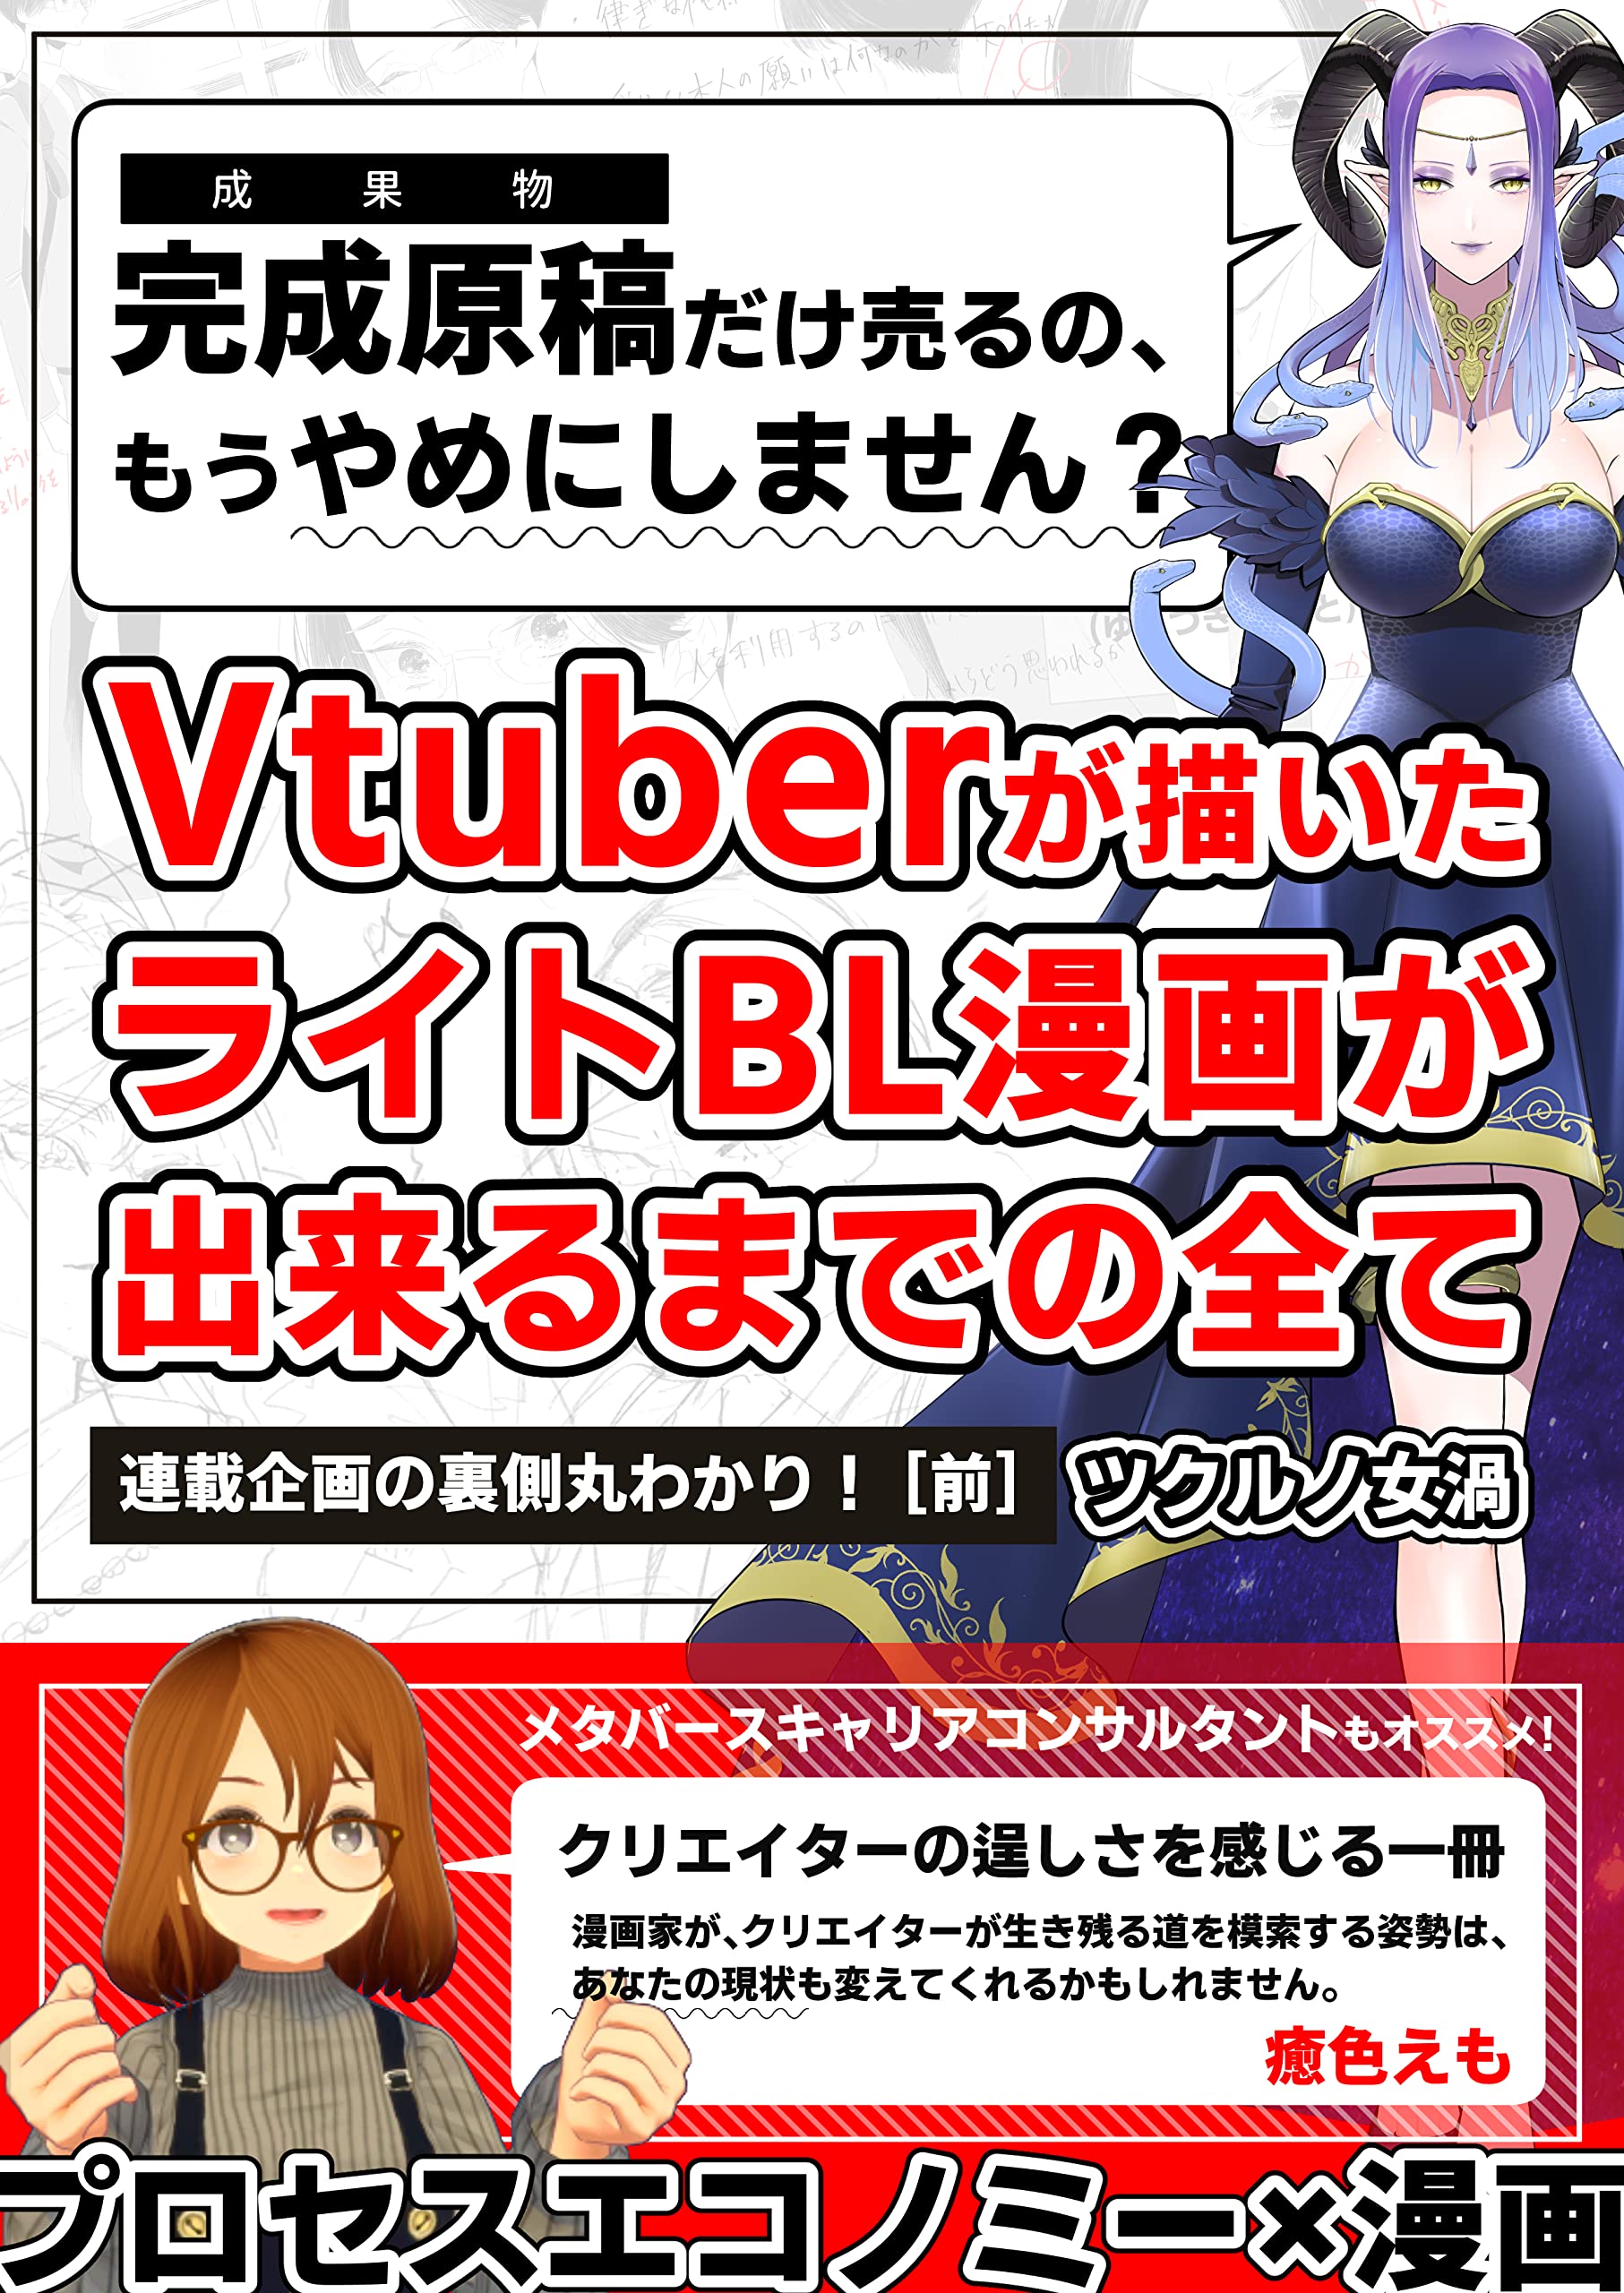 Everything until the light Boys Love comic drawn by Vtuber is made 1: You can see all the behind the scenes of the serialization plan Tsukuruno serial story (Japanese Edition)